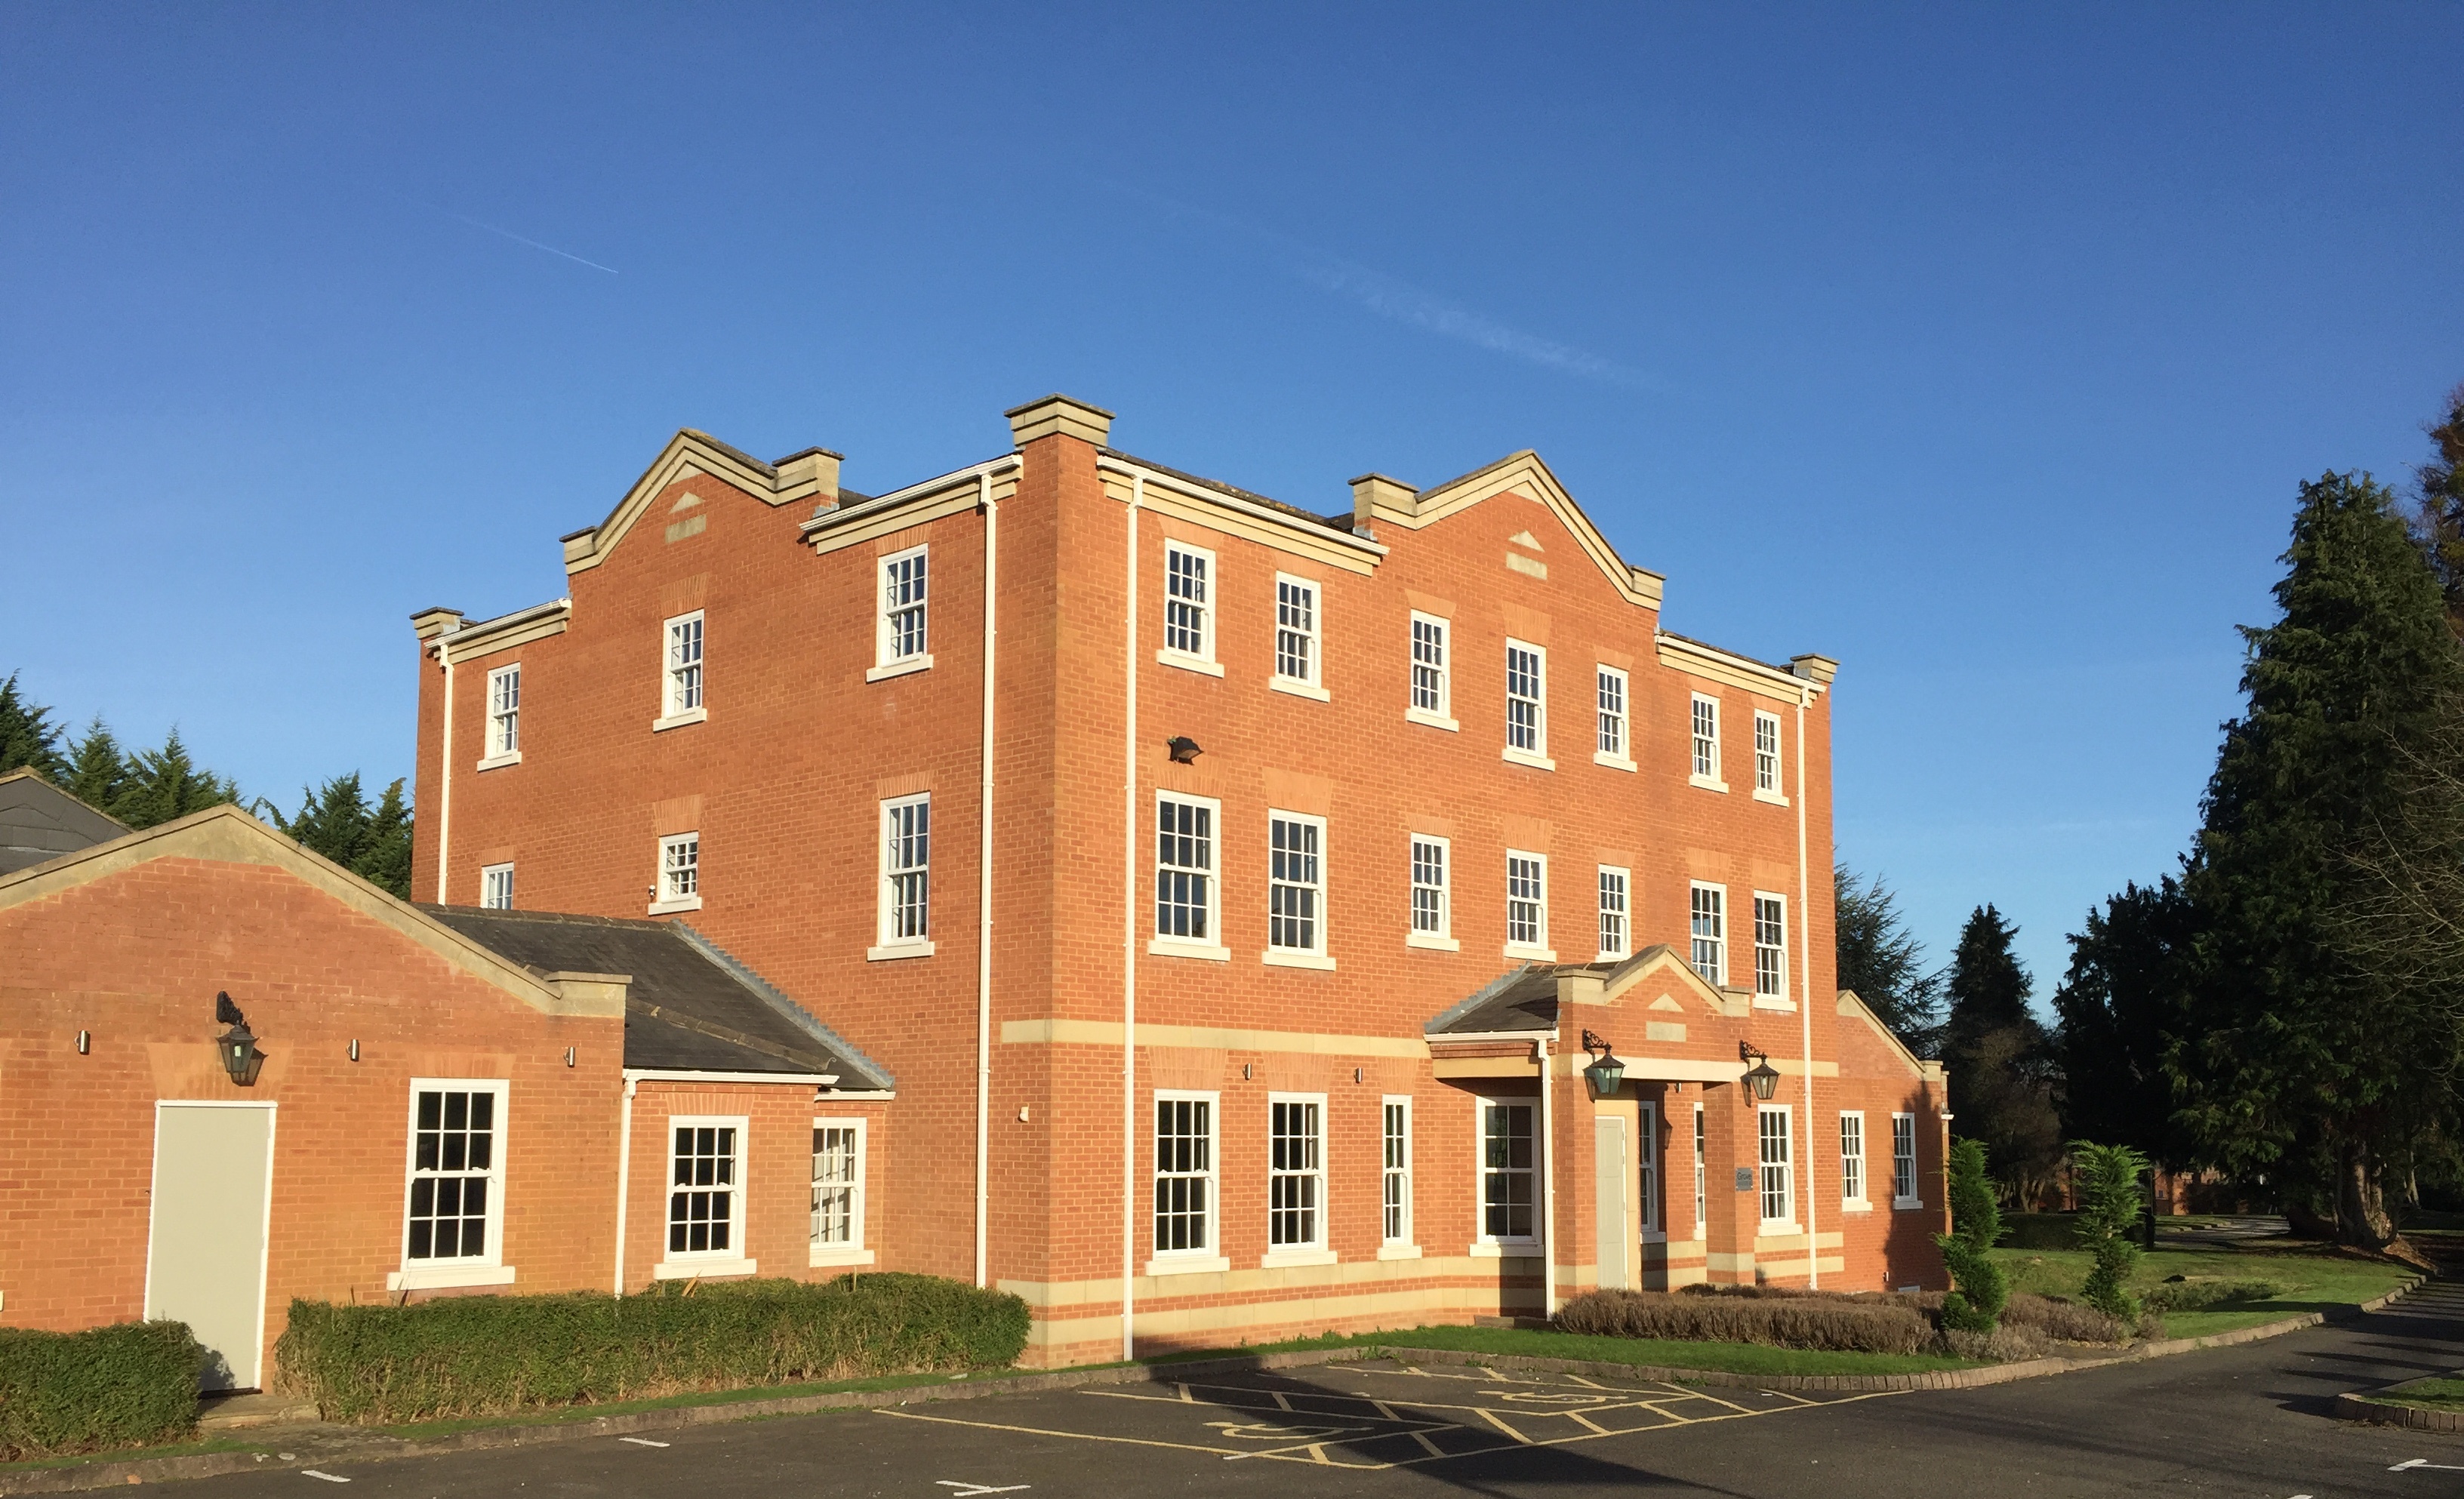 CLEAN moving to new head office in Maidenhead - News - CLEAN Services